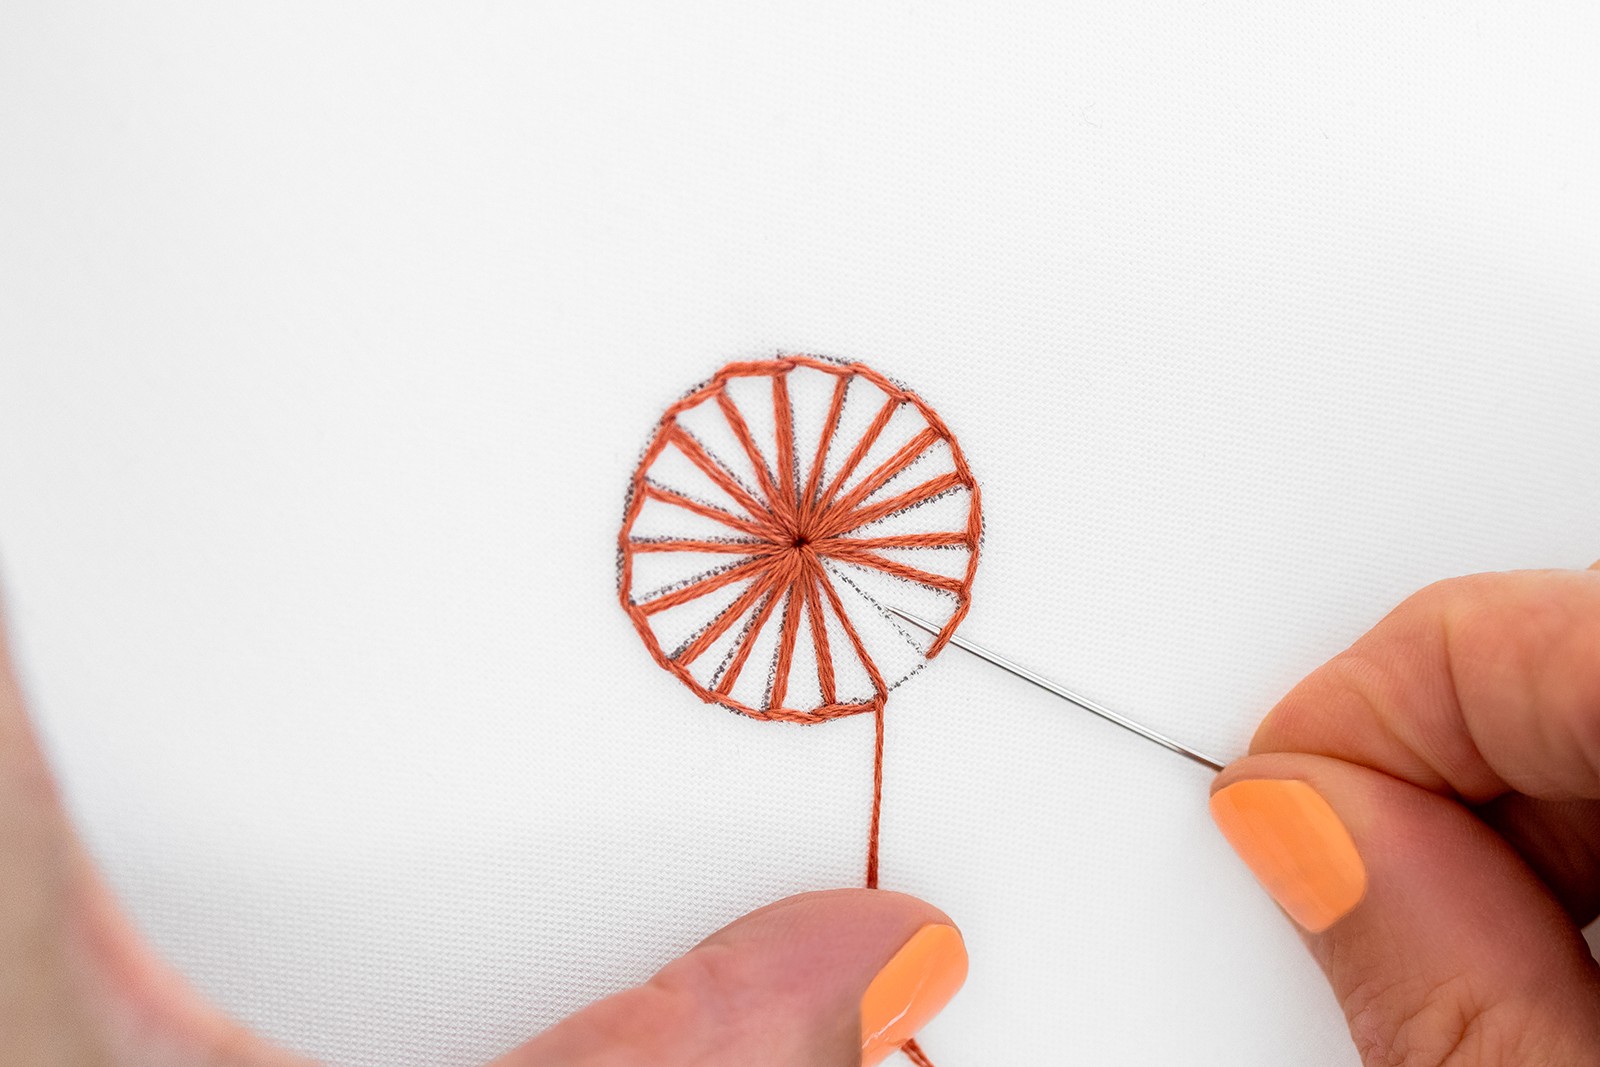 A buttonhole wheel shape is being created on embroidery fabric.